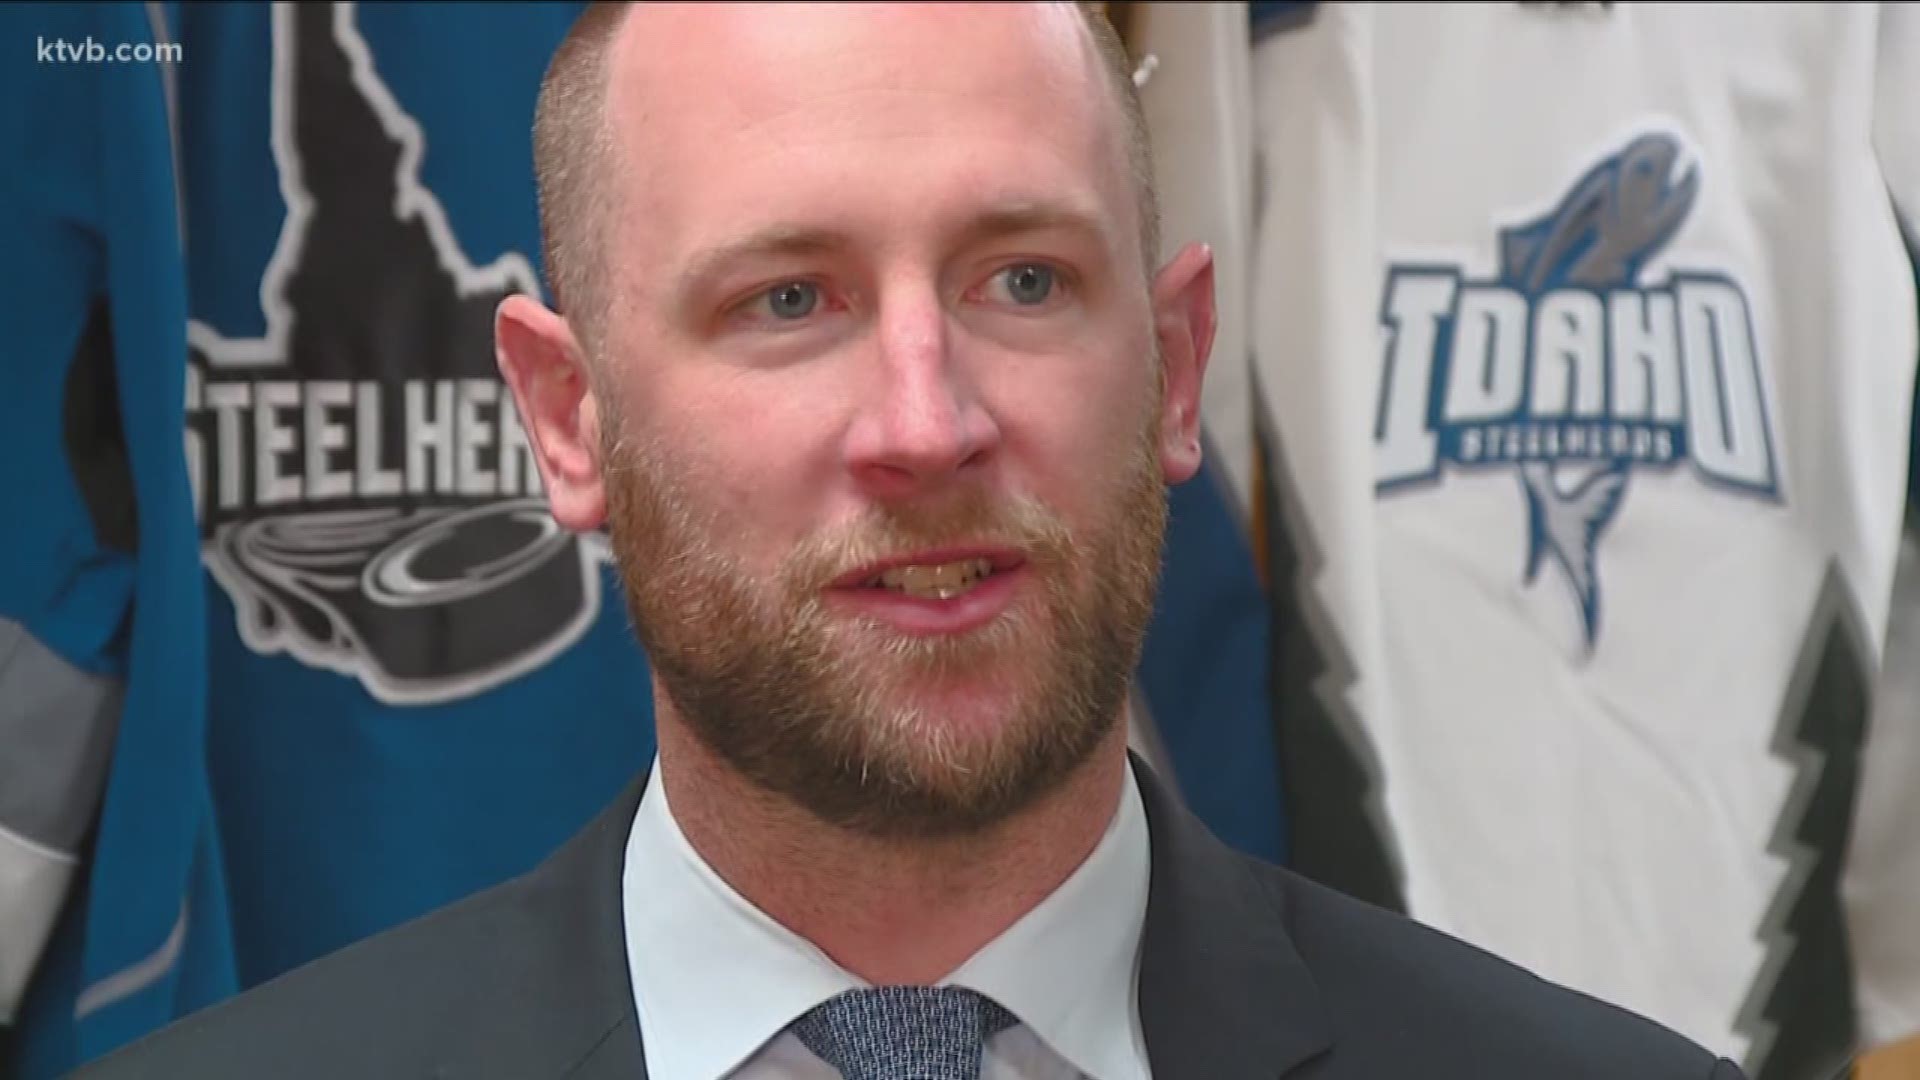 Even though he's never caught an actual steelhead before, the Idaho Steelheads say they're hiring former assistant coach Everett Sheen as the team's new head coach.